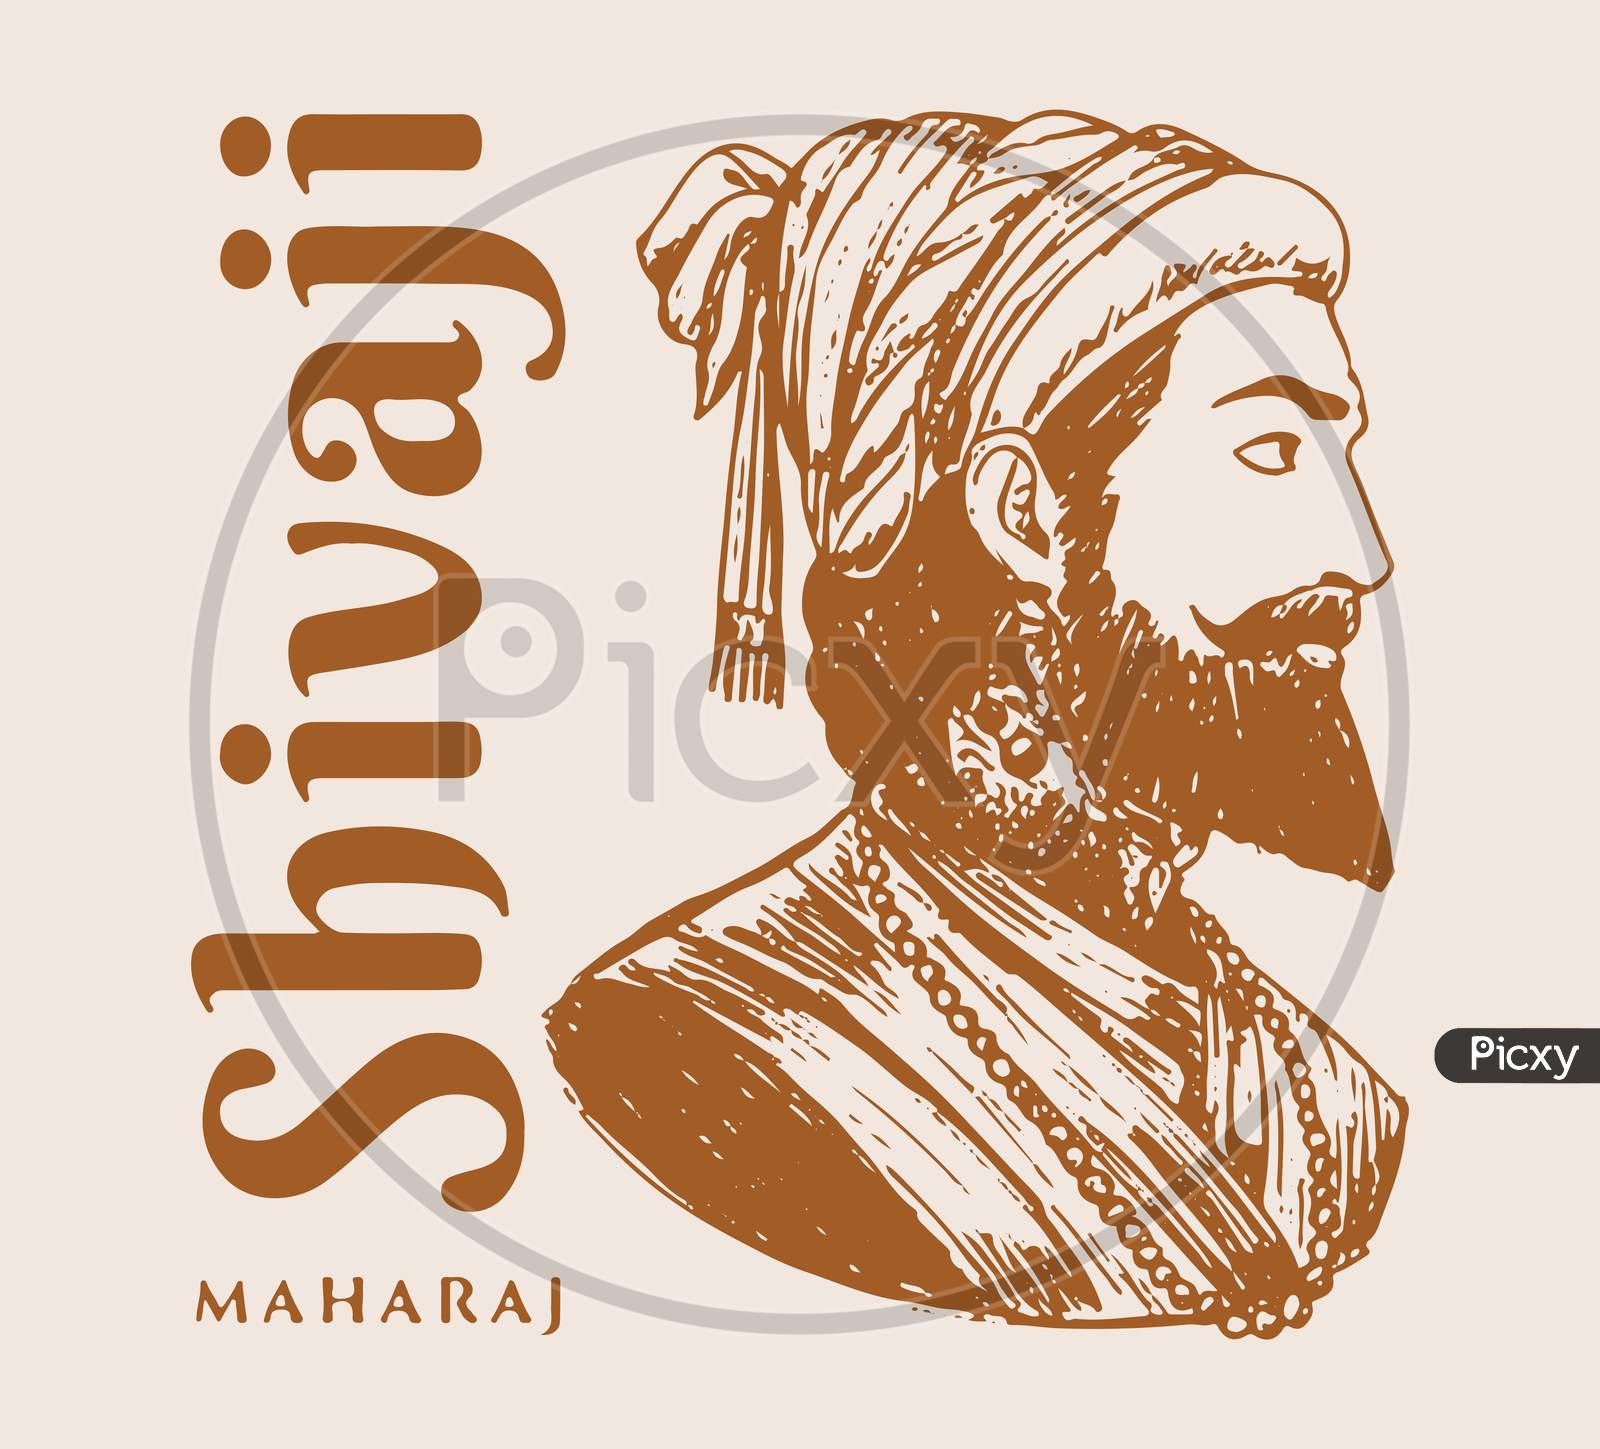 Image of Sketch of Chhatrapati Shivaji Maharaj Indian Ruler and a member of  the Bhonsle Maratha clan outline, silhouette editable  illustration-KG668212-Picxy